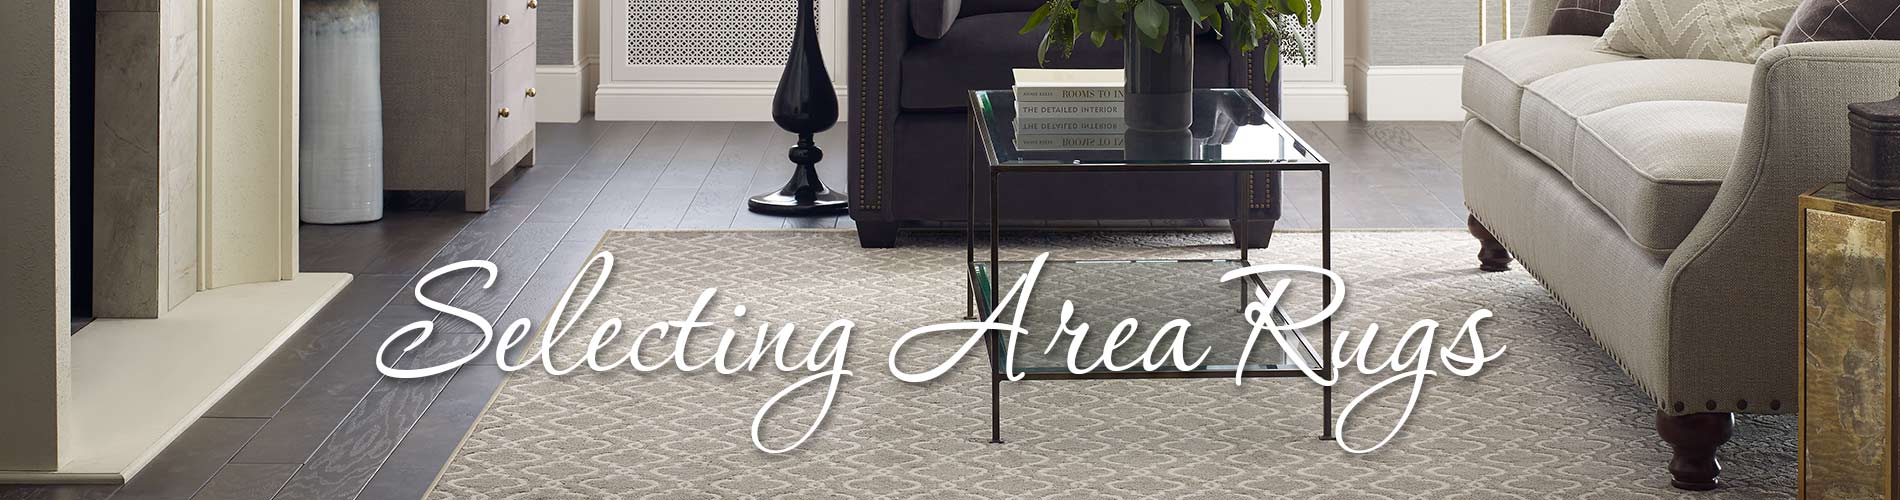 Selecting Area Rugs